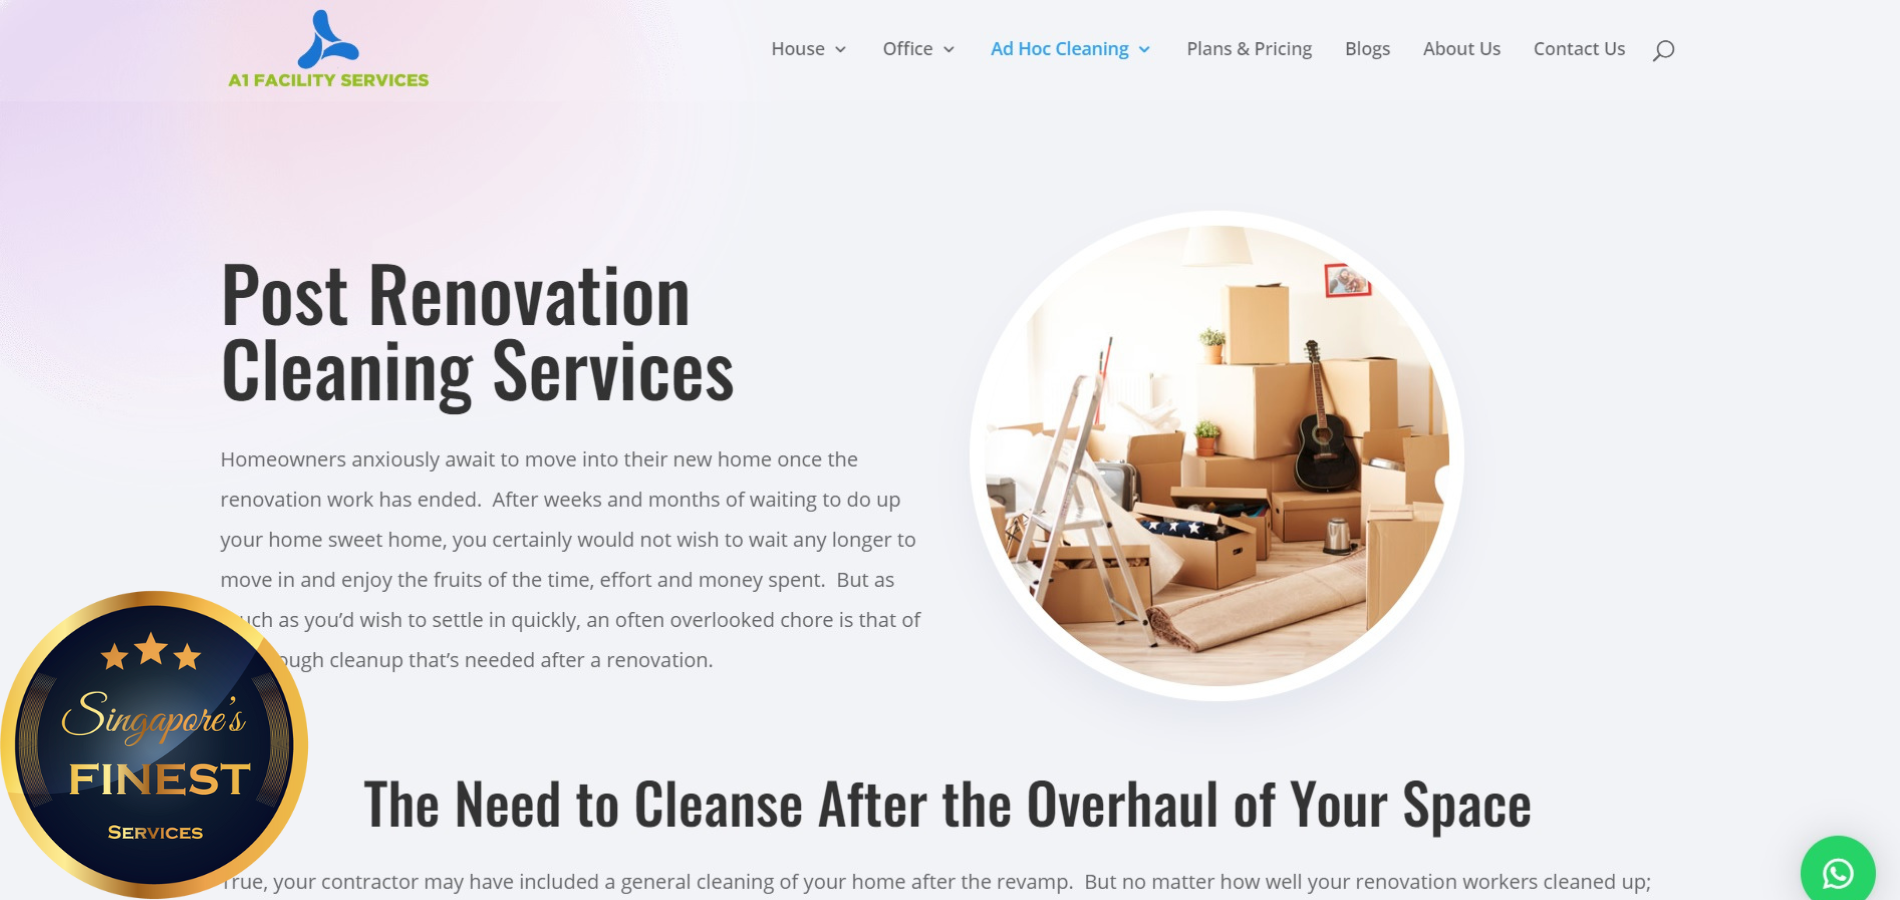 The Finest Experts on Post-Renovation Cleaning in Singapore